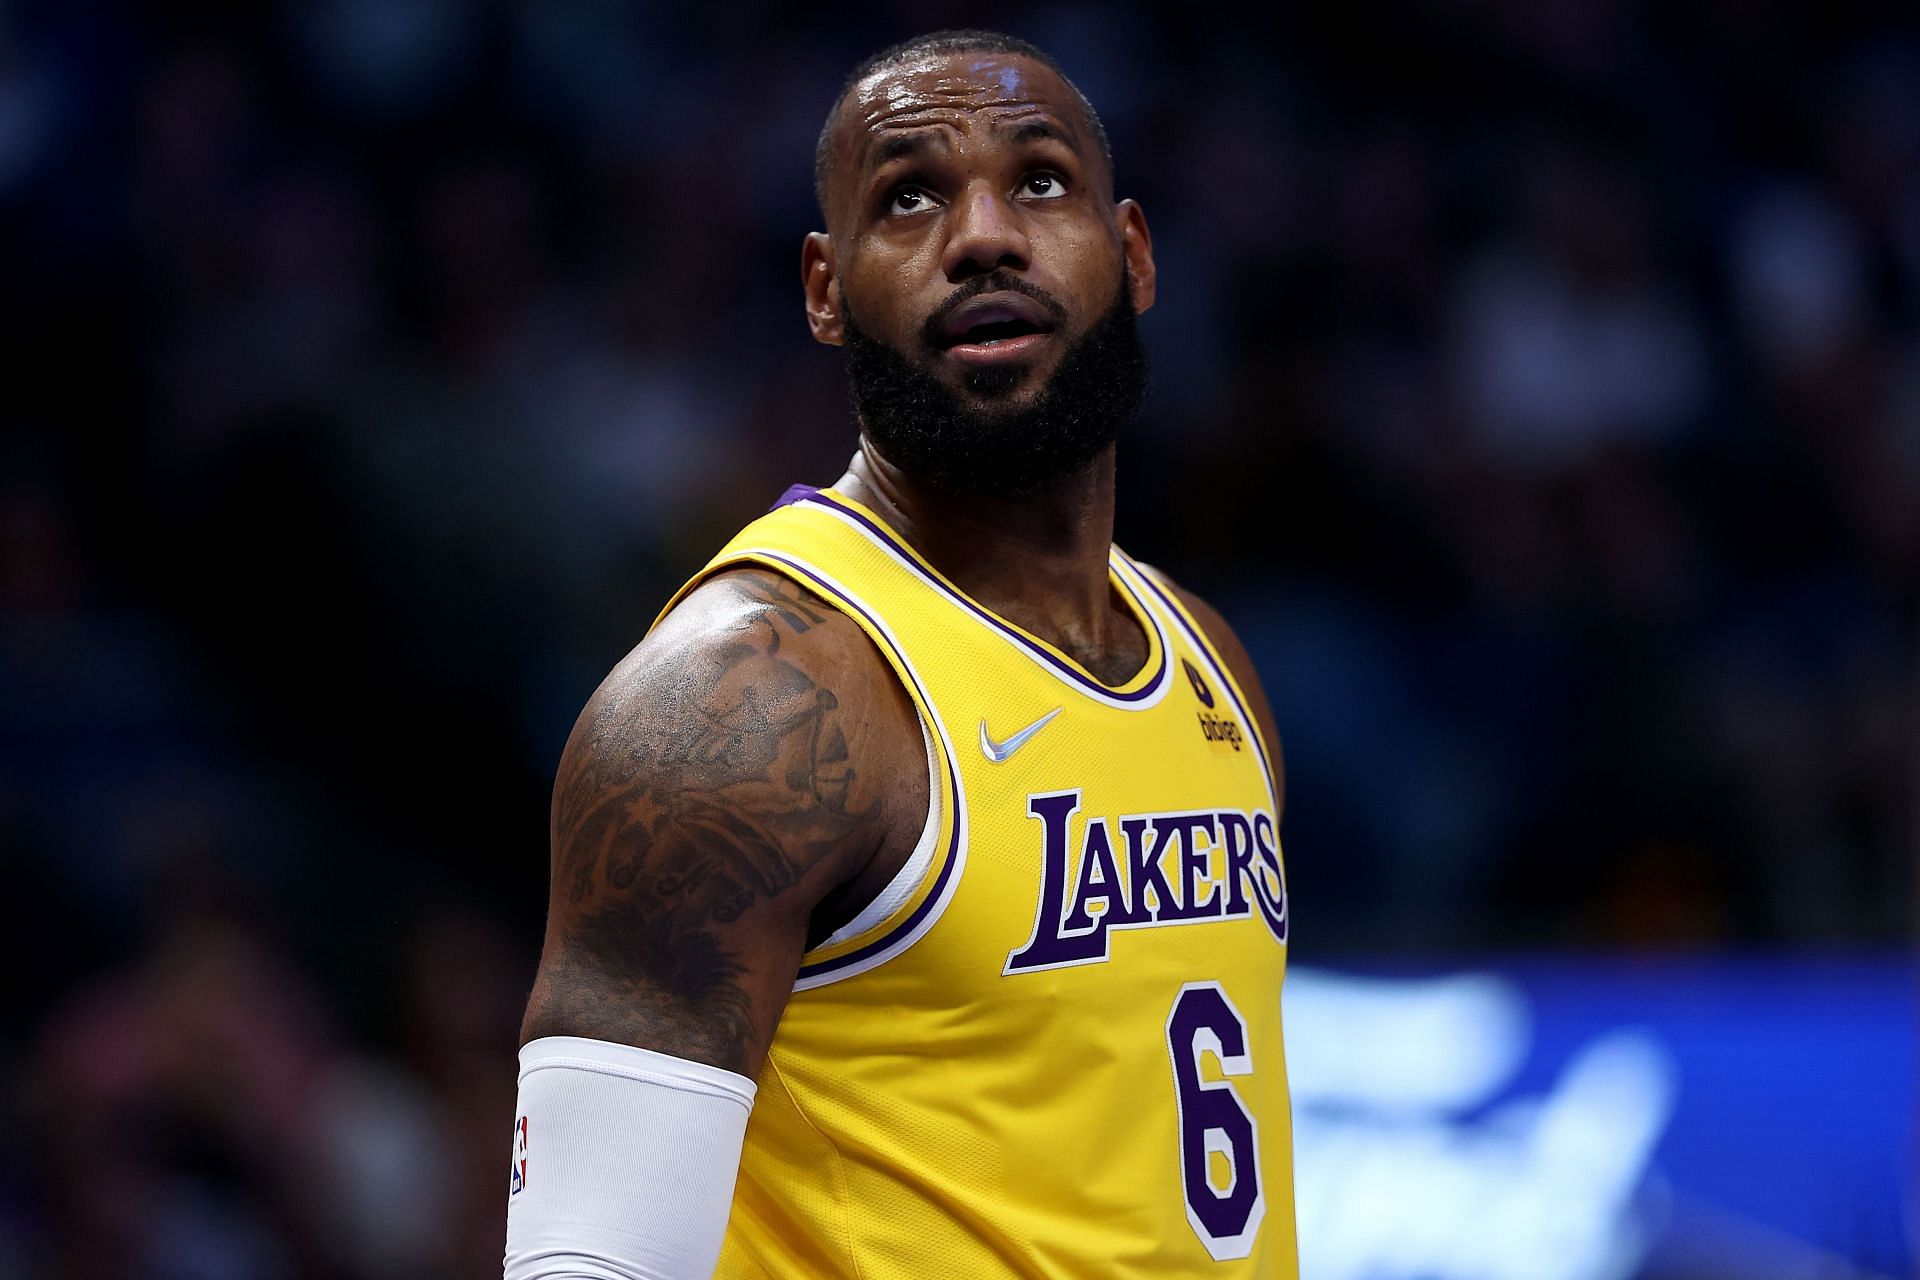 LeBron James of the LA Lakers is in his 19th season in the NBA. He has won four championships.